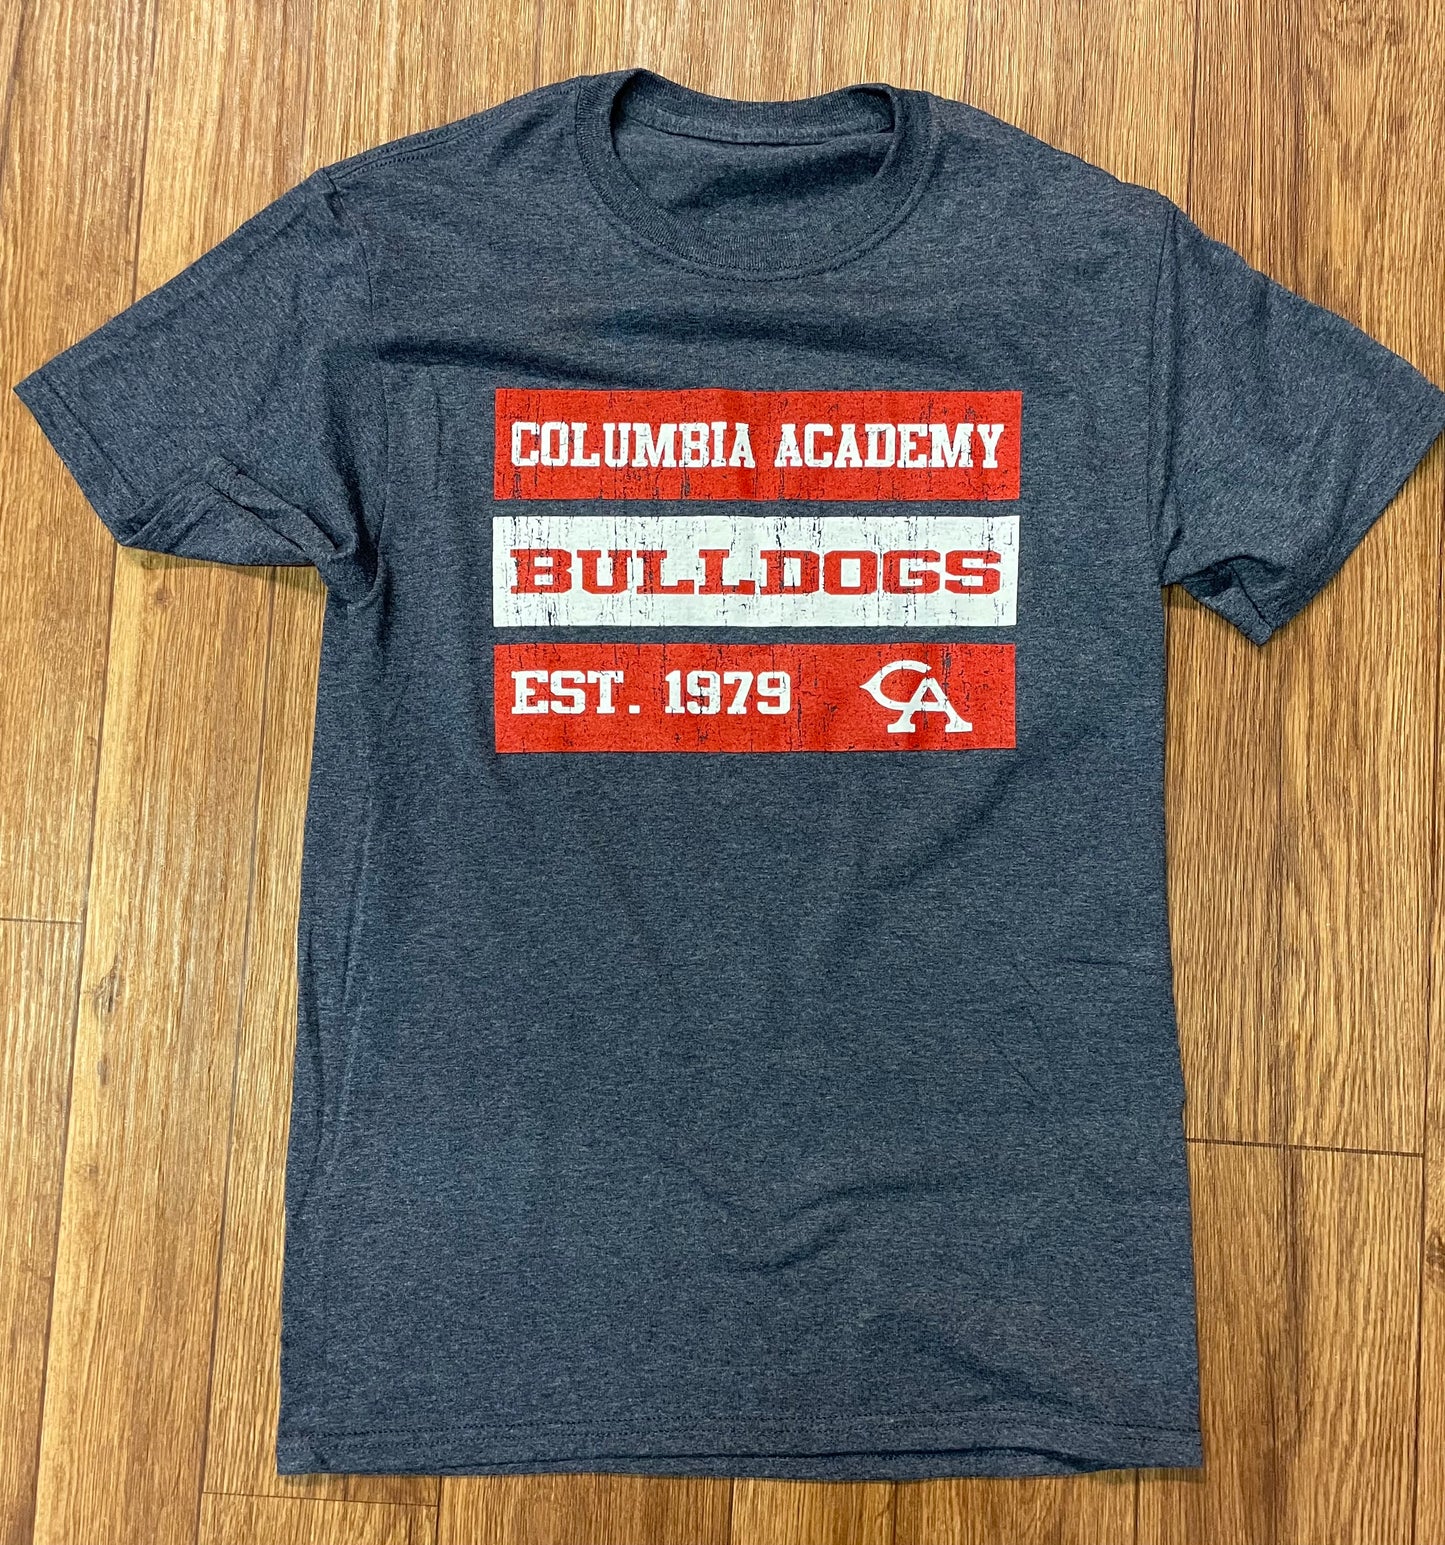 Clearance Columbia Academy 1979 Cotton T-Shirt